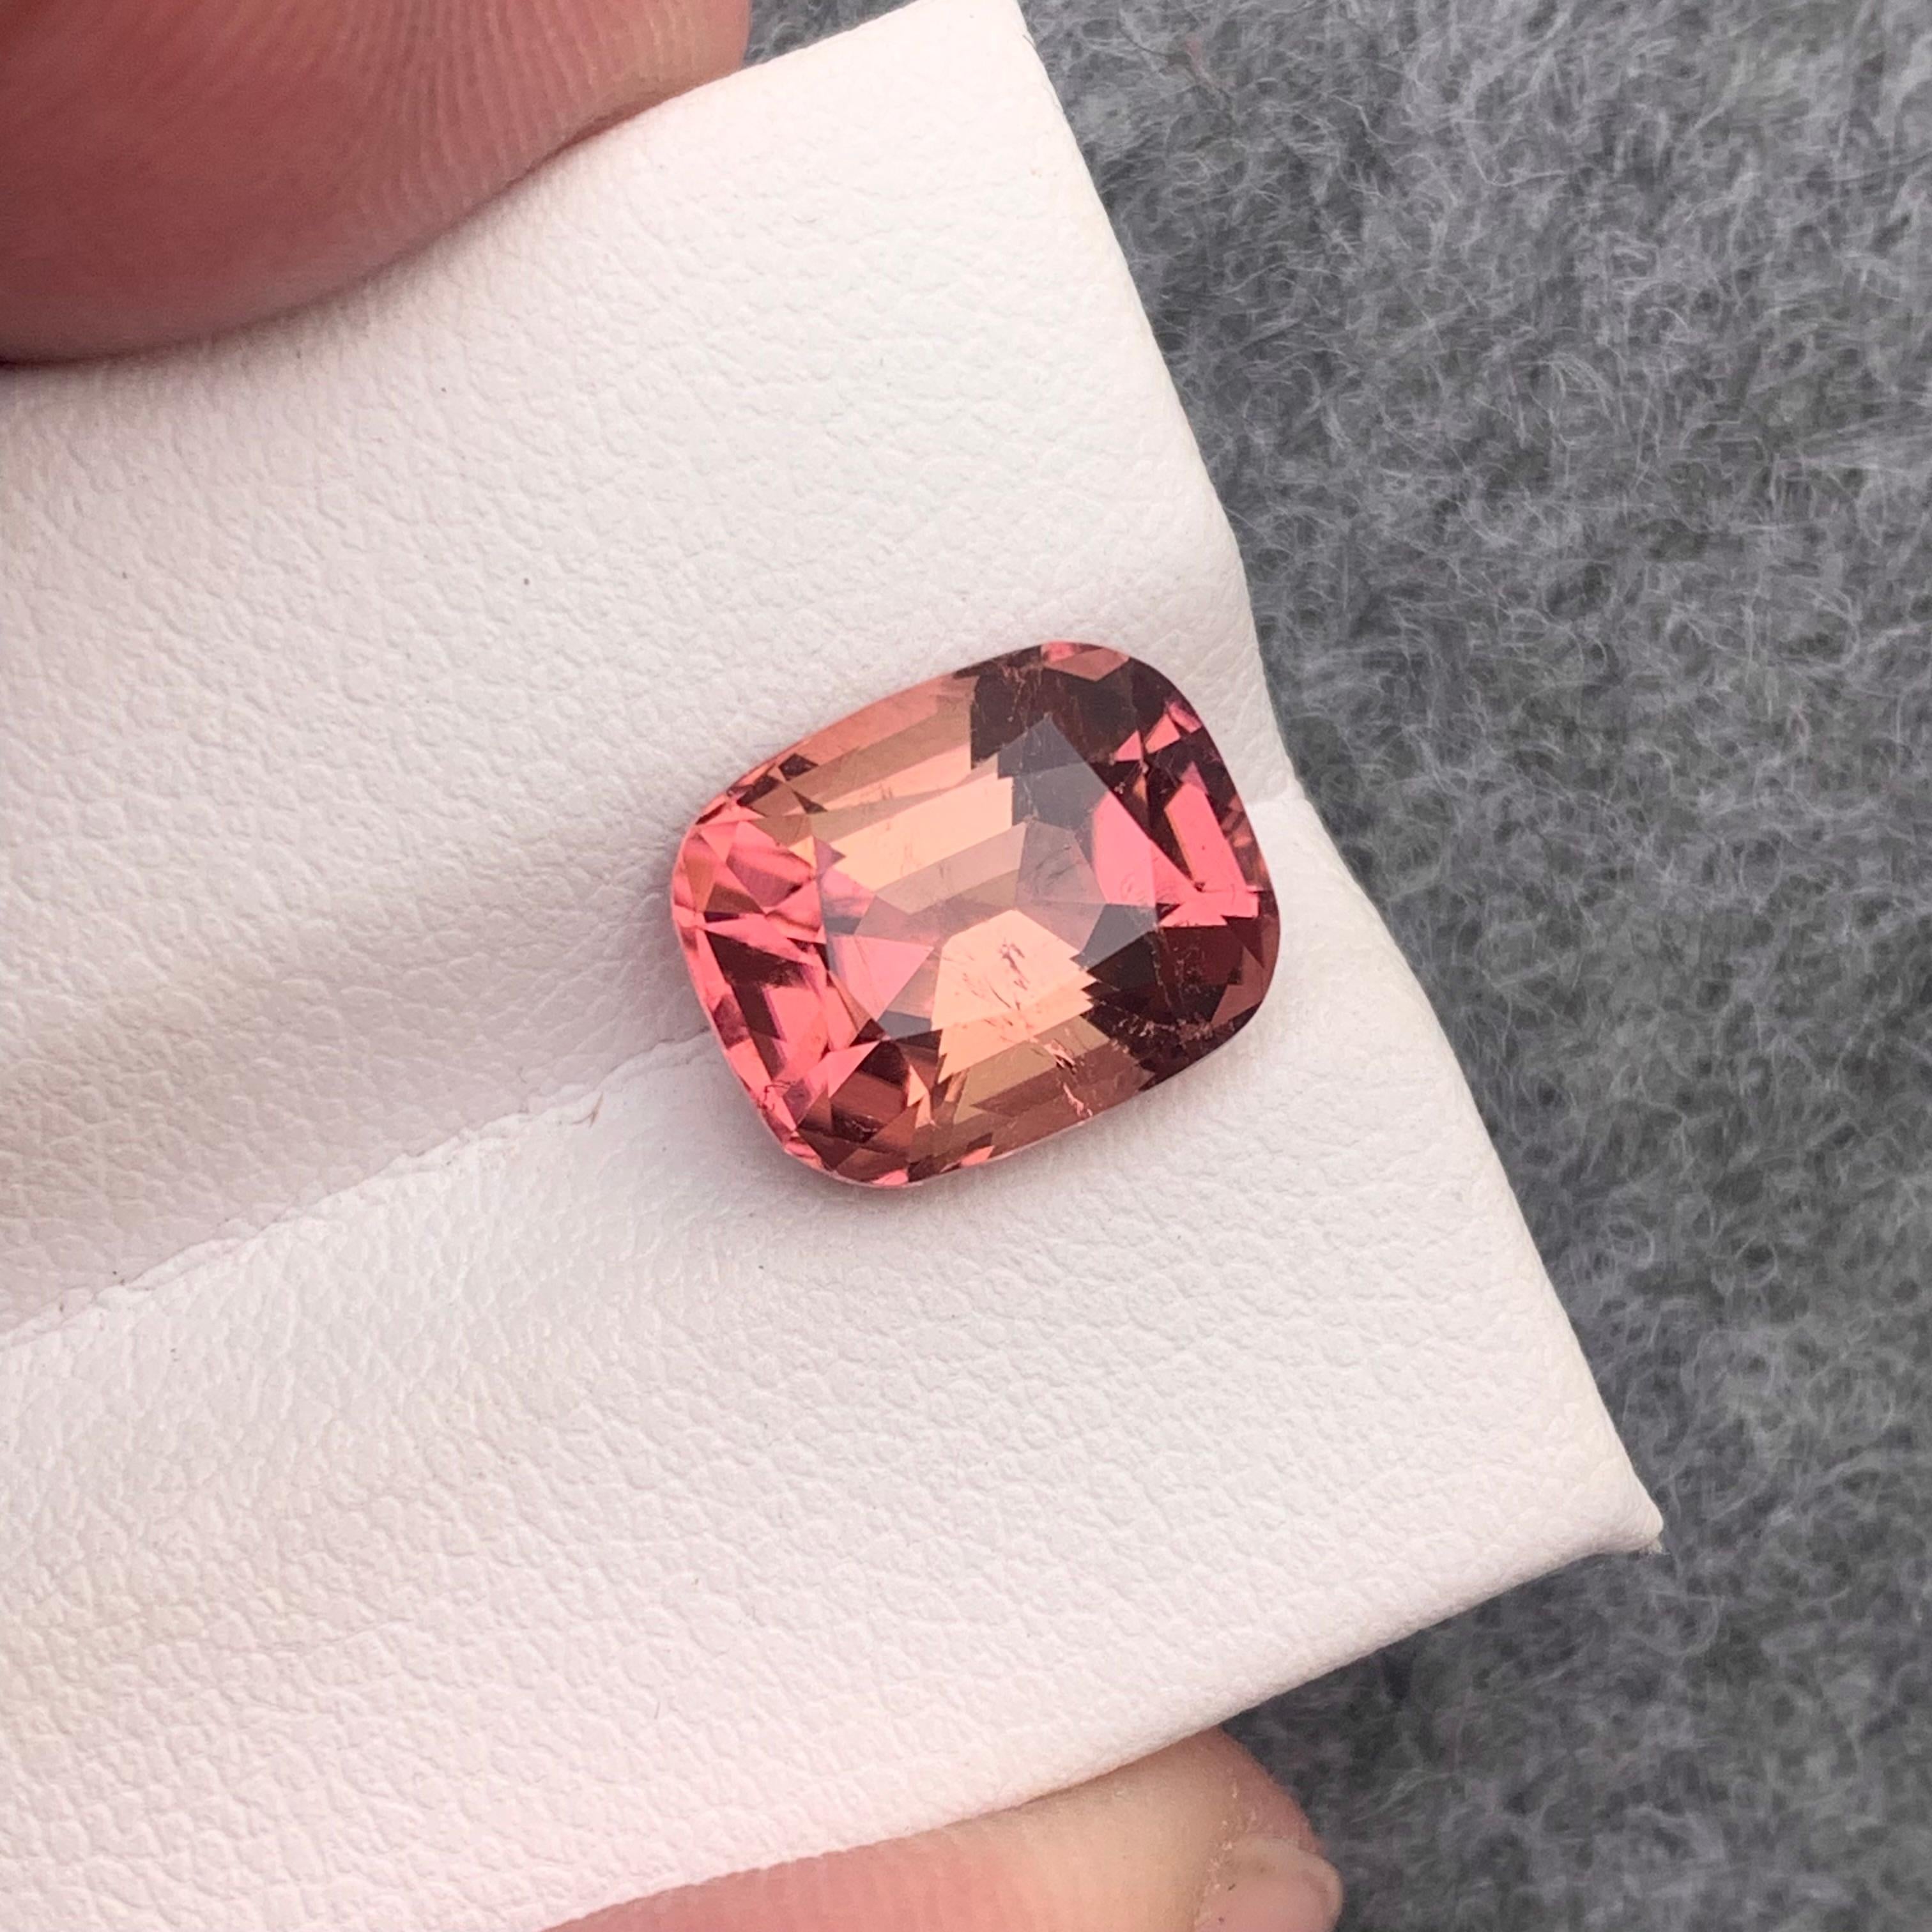 Gemstone Type : Tourmaline
Weight : 4.60 Carats
Dimensions : 11.2x9x6.7 Mm
Origin : Kunar Afghanistan
Clarity : SI
Shape: Cushion
Color: Pink
Certificate: On Demand
Basically, mint tourmalines are tourmalines with pastel hues of light green to